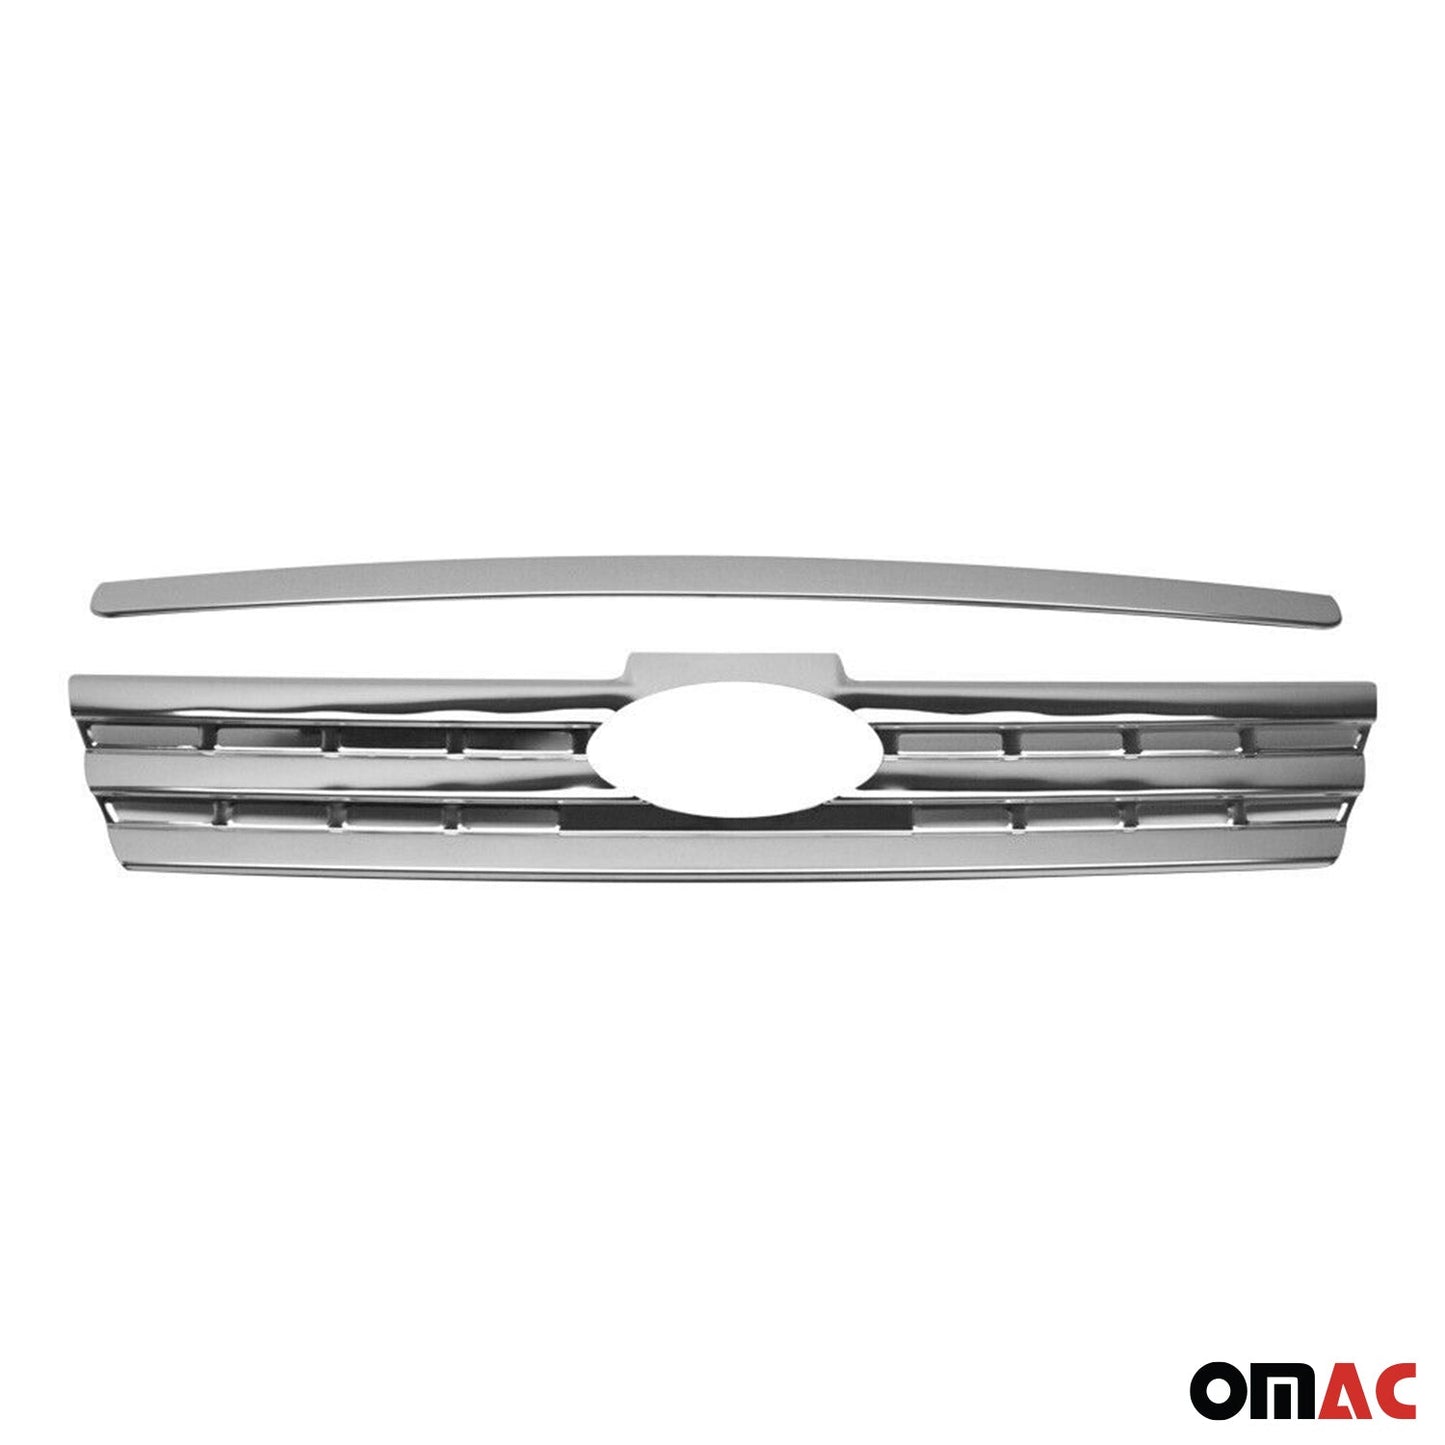 OMAC Front Bumper Grill Trim Chrome Set for Ford Transit Connect 2010-2013 Steel 4x G003331